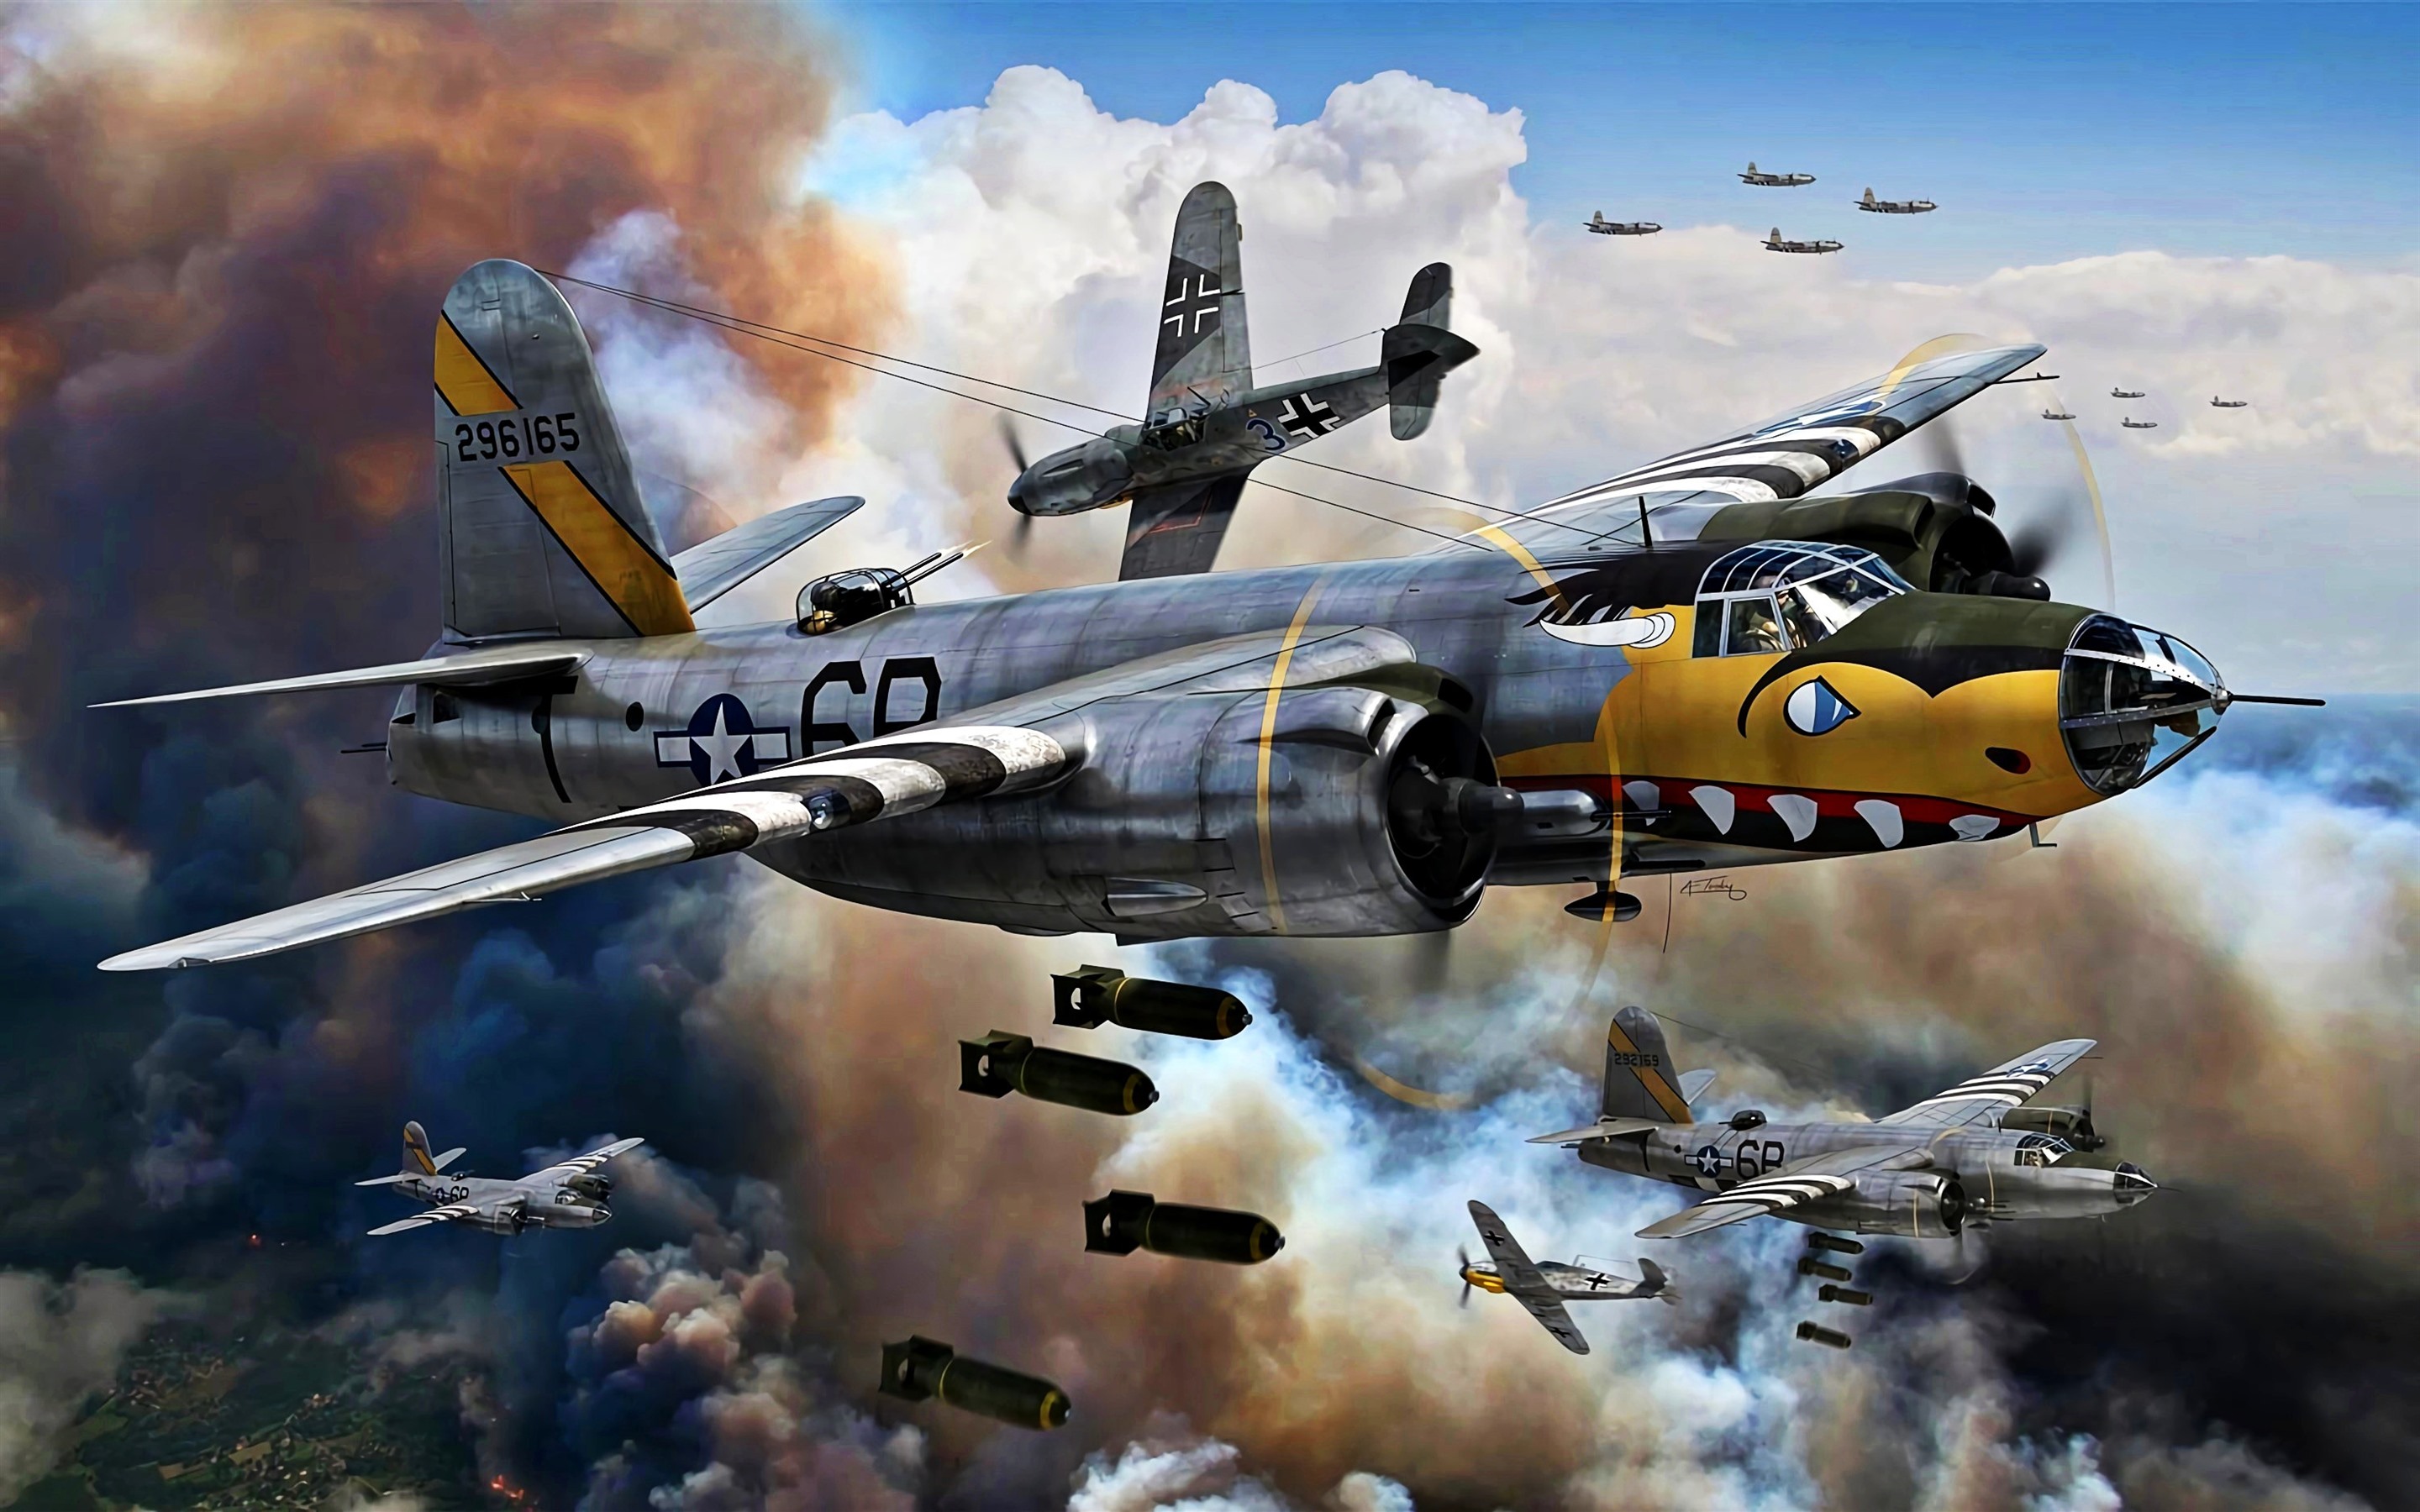 Wallpaper Air Force, bomber, war, art picture 2880x1800 HD Picture, Image